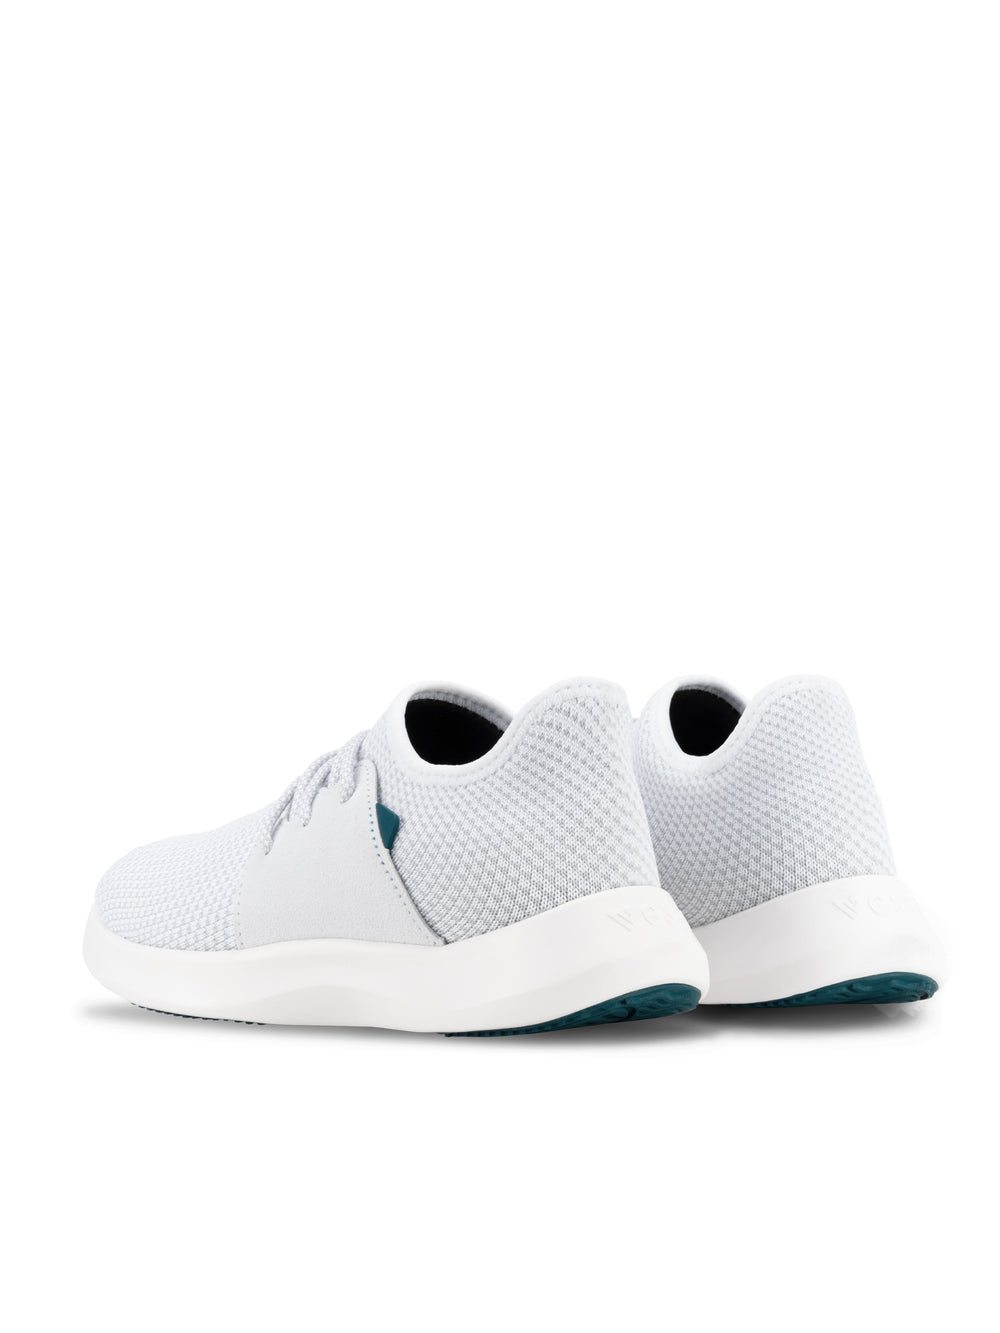 MENS VESSI EVERYDAY CLS SNEAKER - WHITE